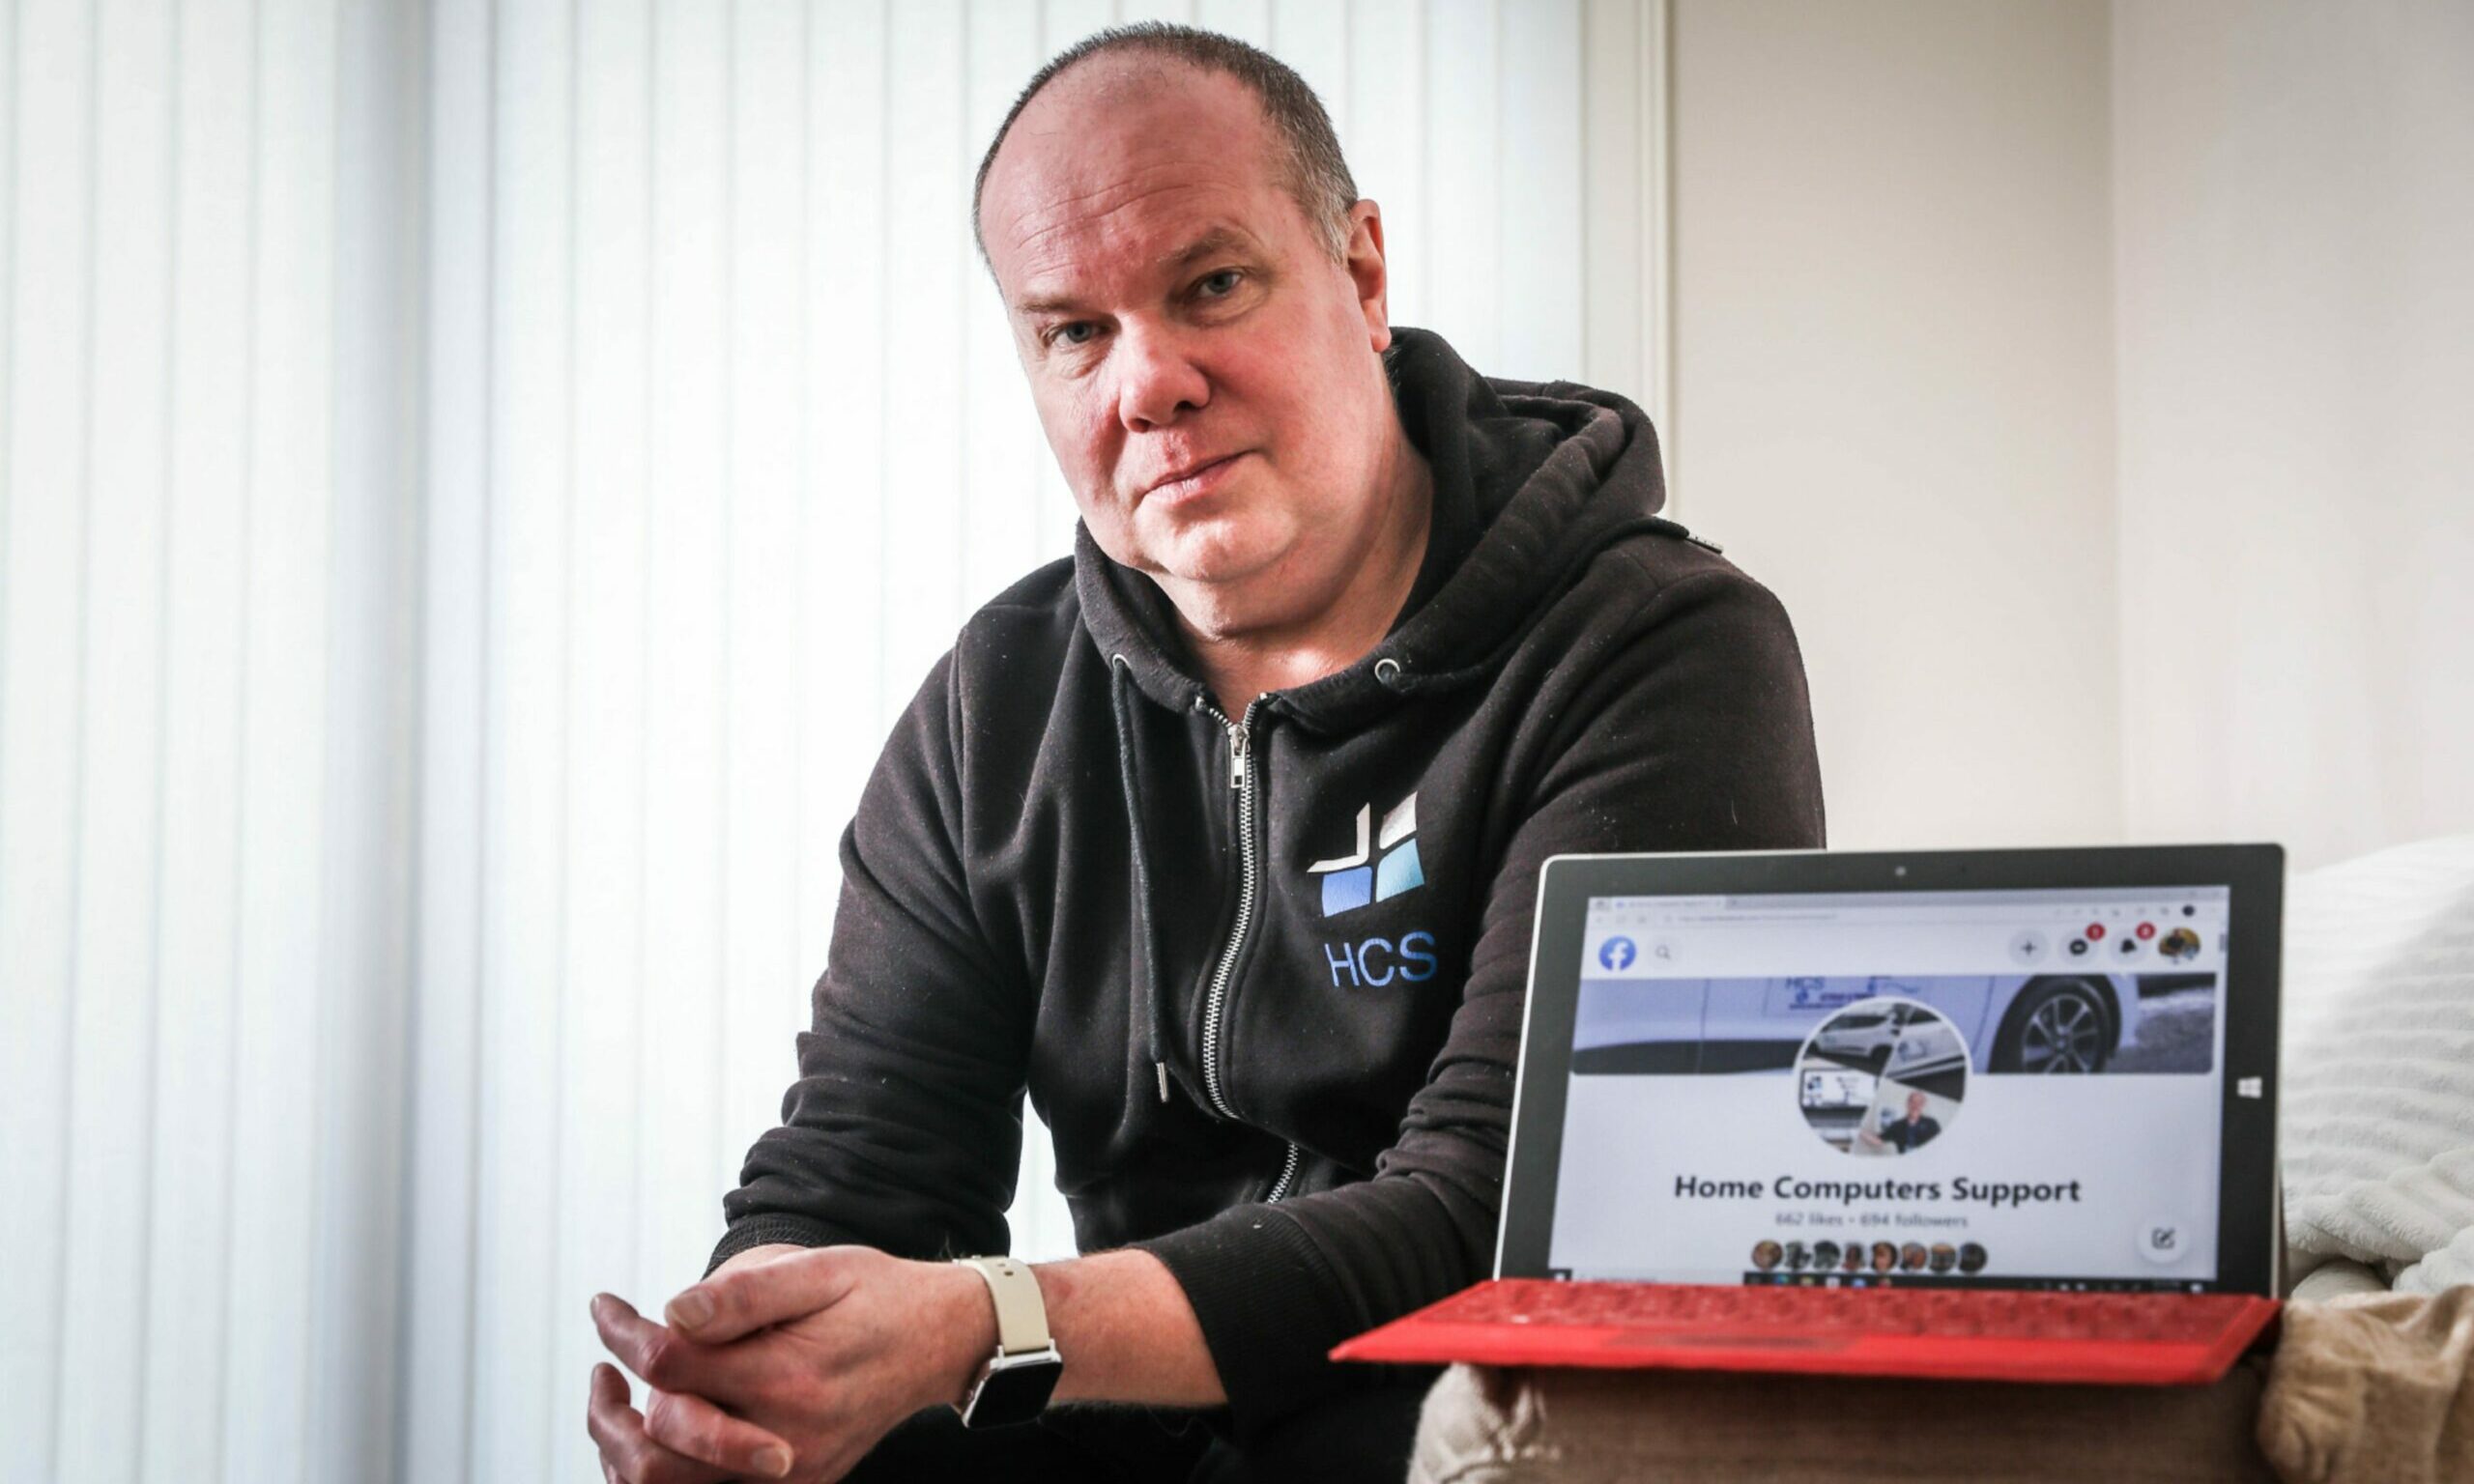 Dundee businessman's fury after Facebook account hacked